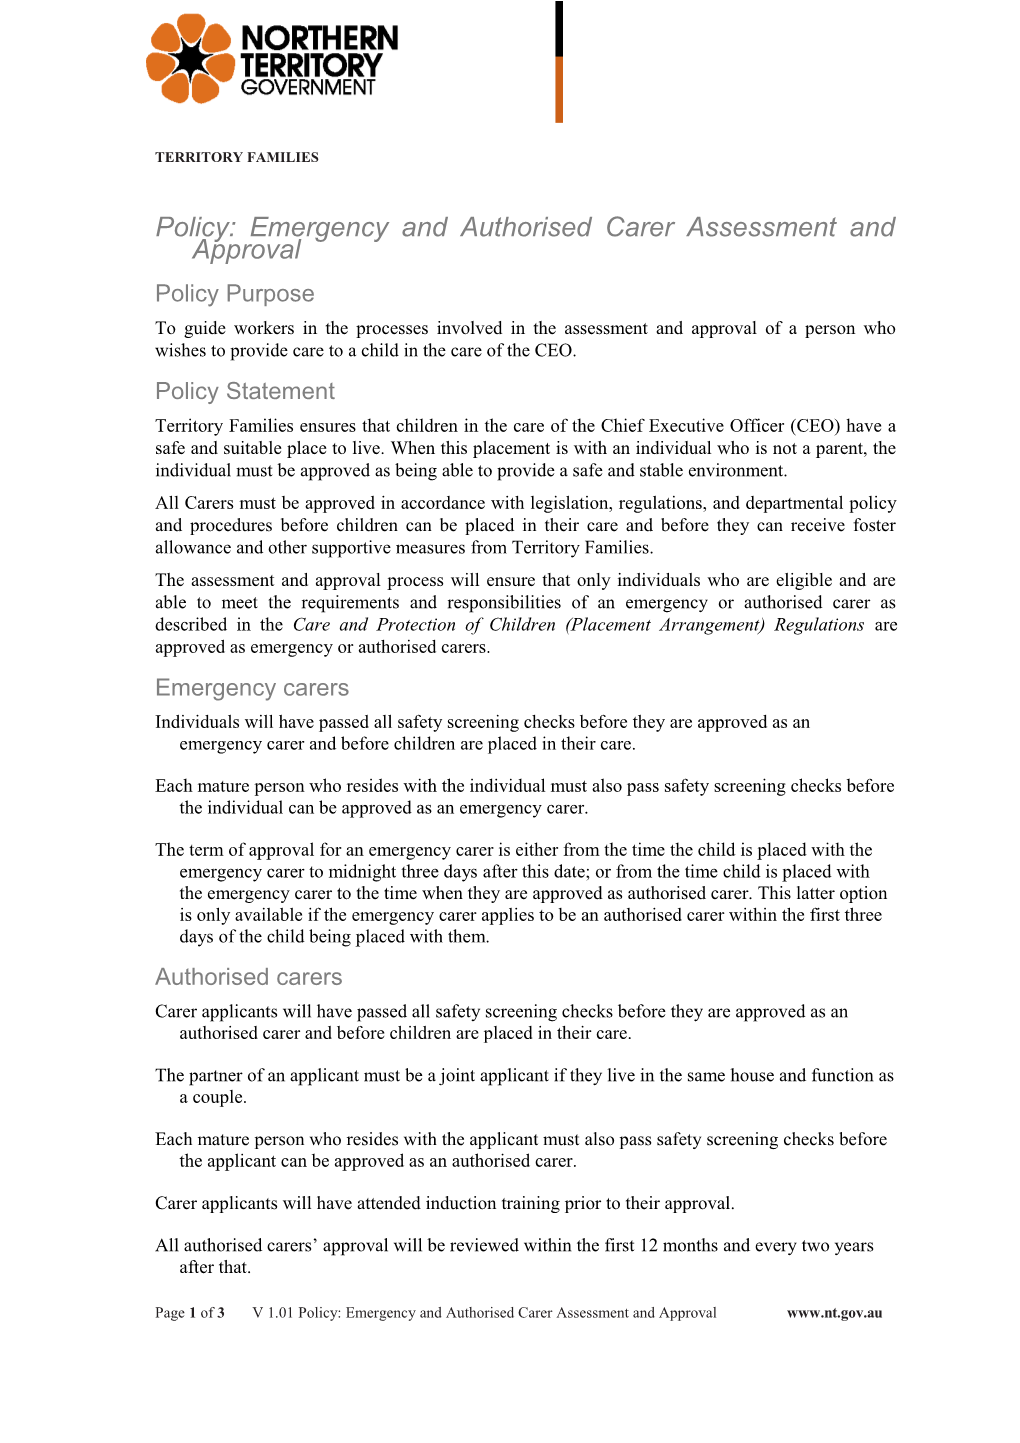 Policy: Emergency and Authorised Carer Assessment and Approval